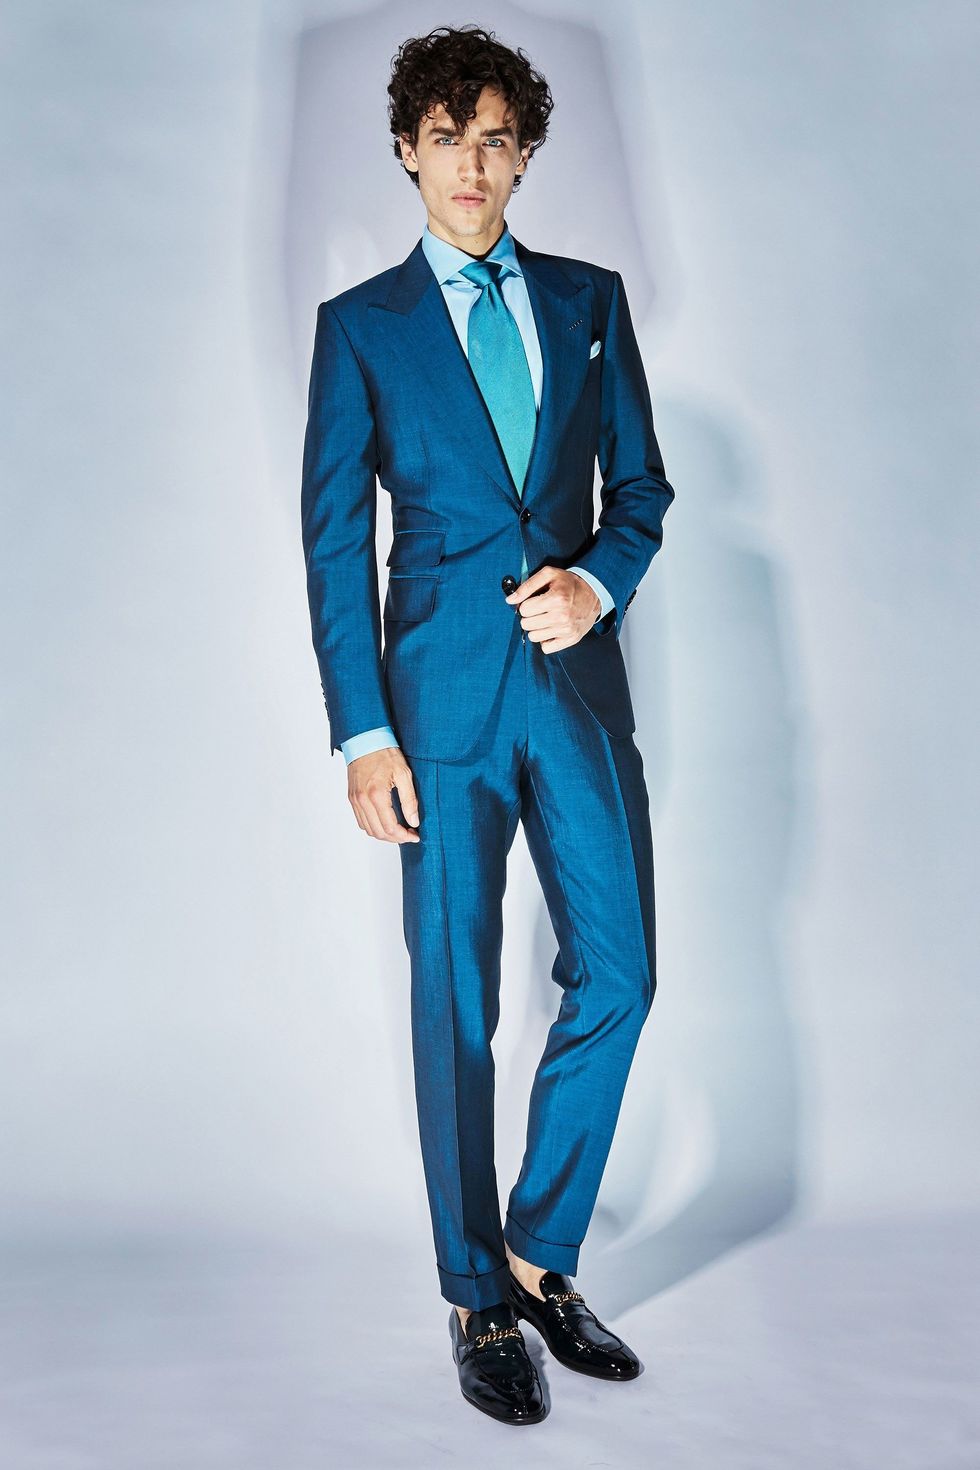 Suit, Clothing, Blue, Formal wear, Fashion model, Tuxedo, Fashion, Standing, Electric blue, Outerwear, 